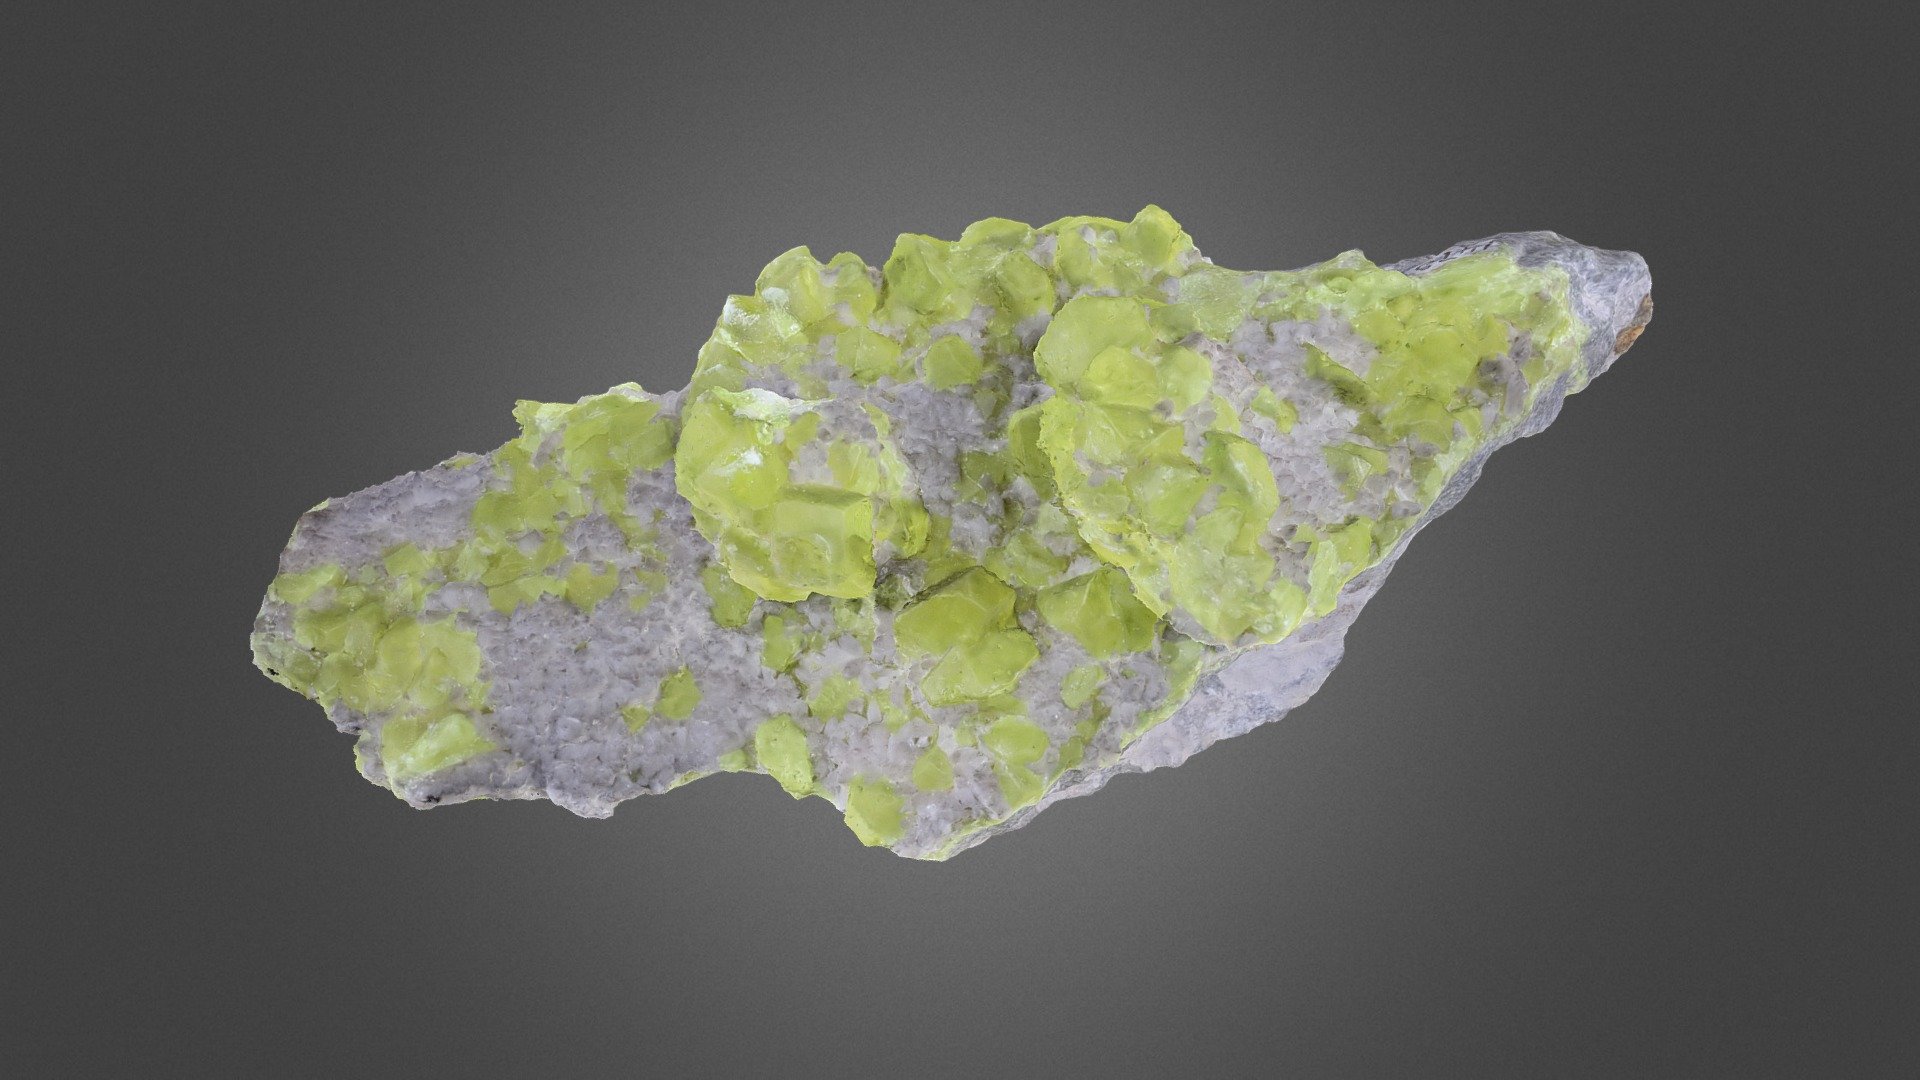 Elemental sulfur is a lustrous, lemon yellow, crystalline mineral that forms close to volcanic vents and hot springs 3d model